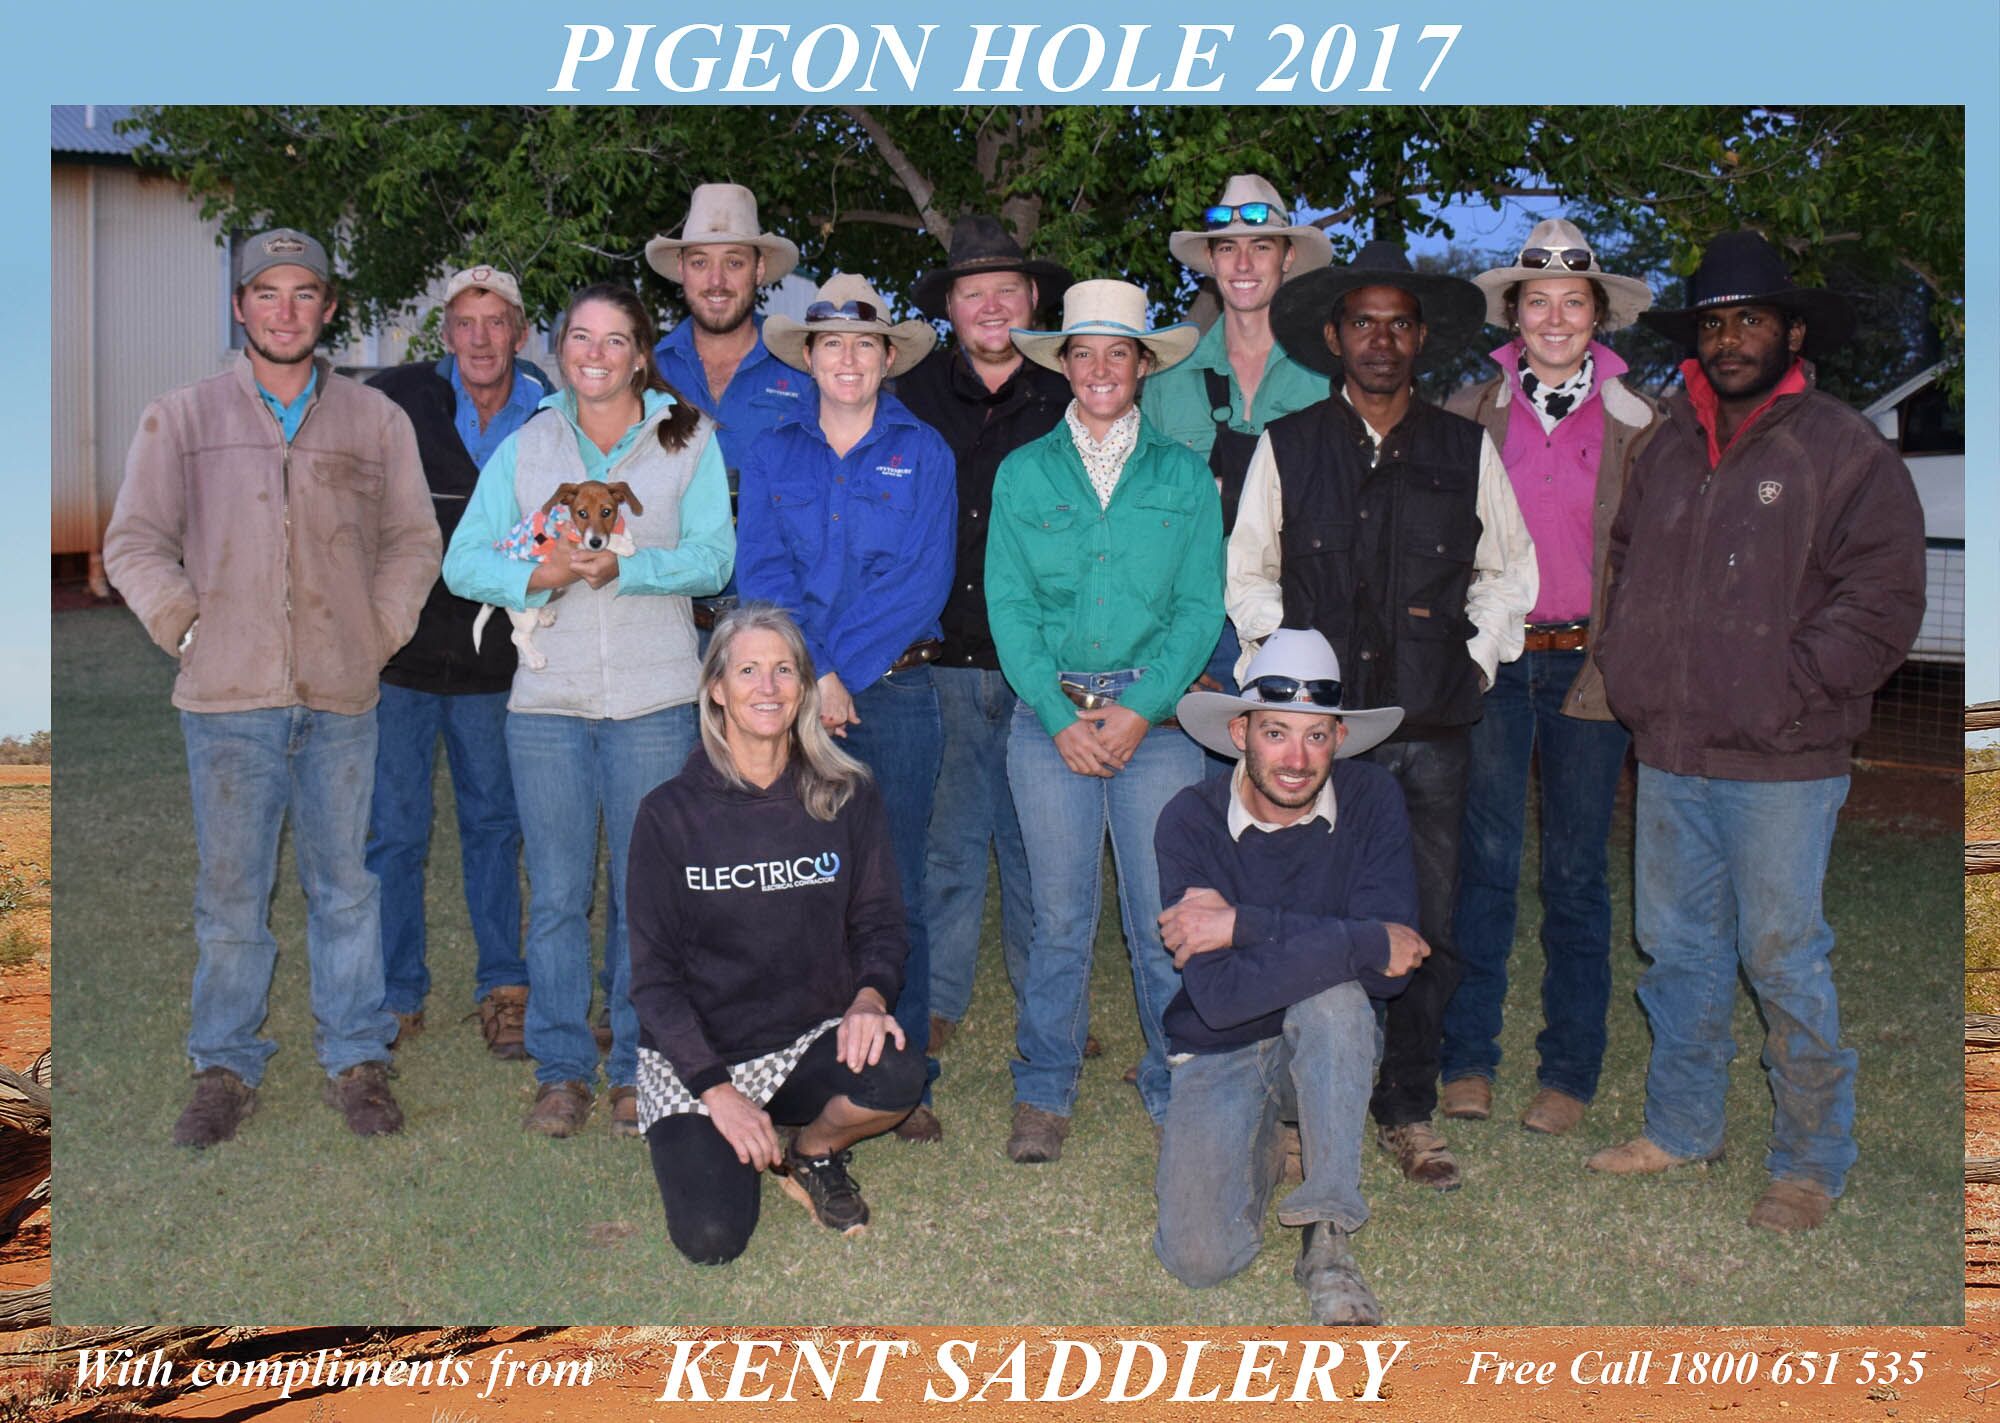 Northern Territory - Pigeon Hole 17